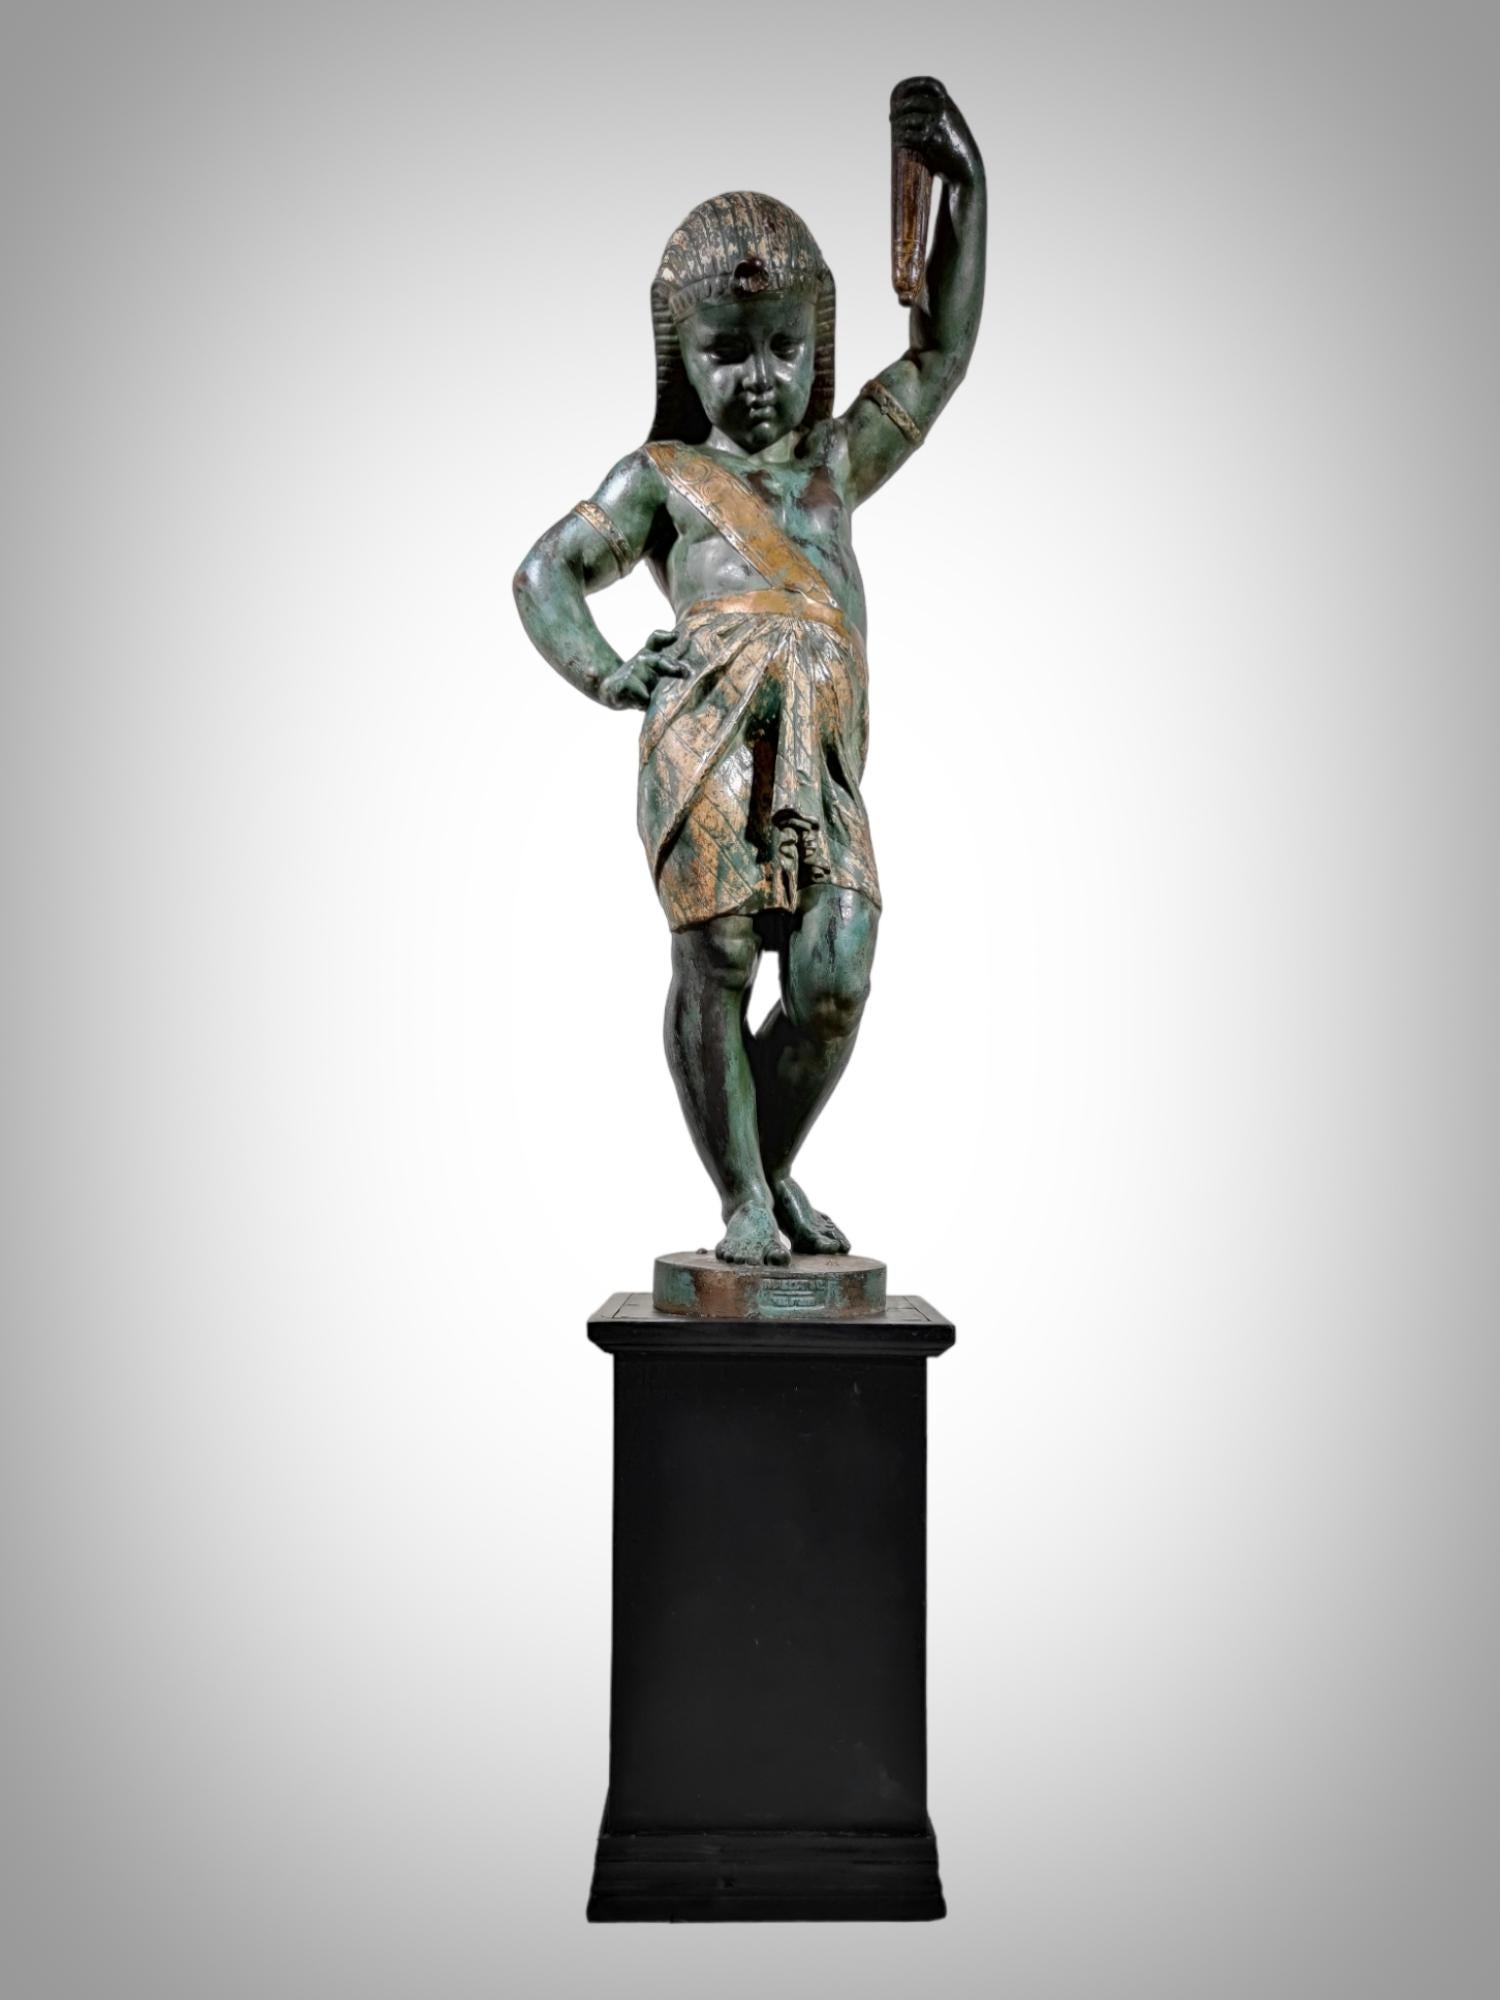 Val d'Osne Art Foundry, After Mathurin Moreau (1822-1912) Egyptian sculpture
FONDERIE D'ART DU VAL D'OSNE, after Mathurin Moreau (1822-1912).
 Egyptian boy sculpture in polychrome cast iron, forming light holder.
This sculpture are reproduced in